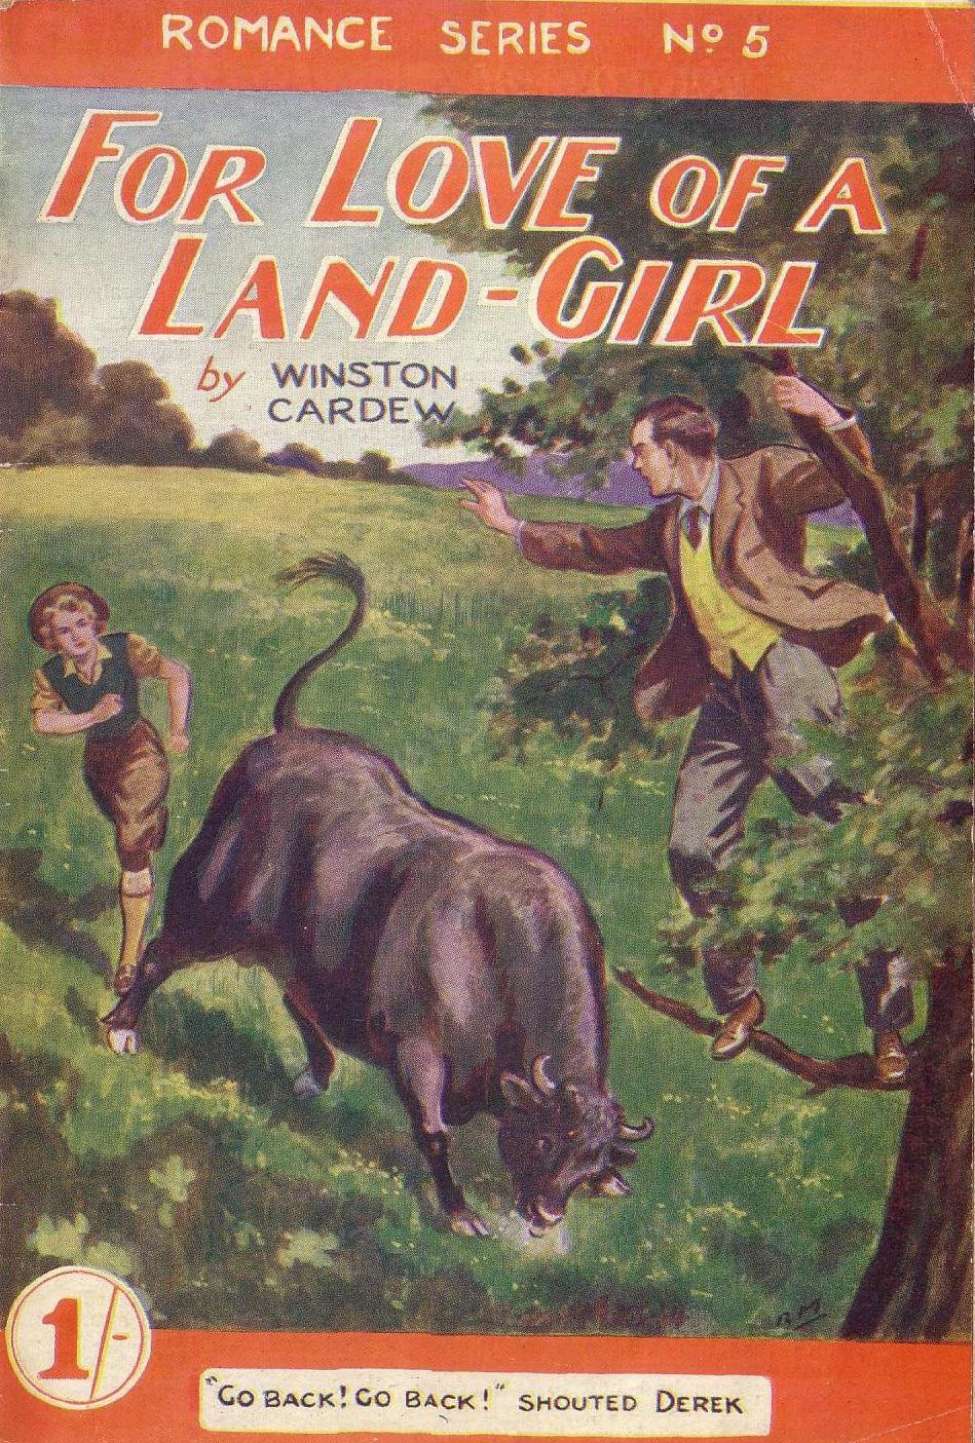 Comic Book Cover For Romance Series 5 For Love Of A Land Girl